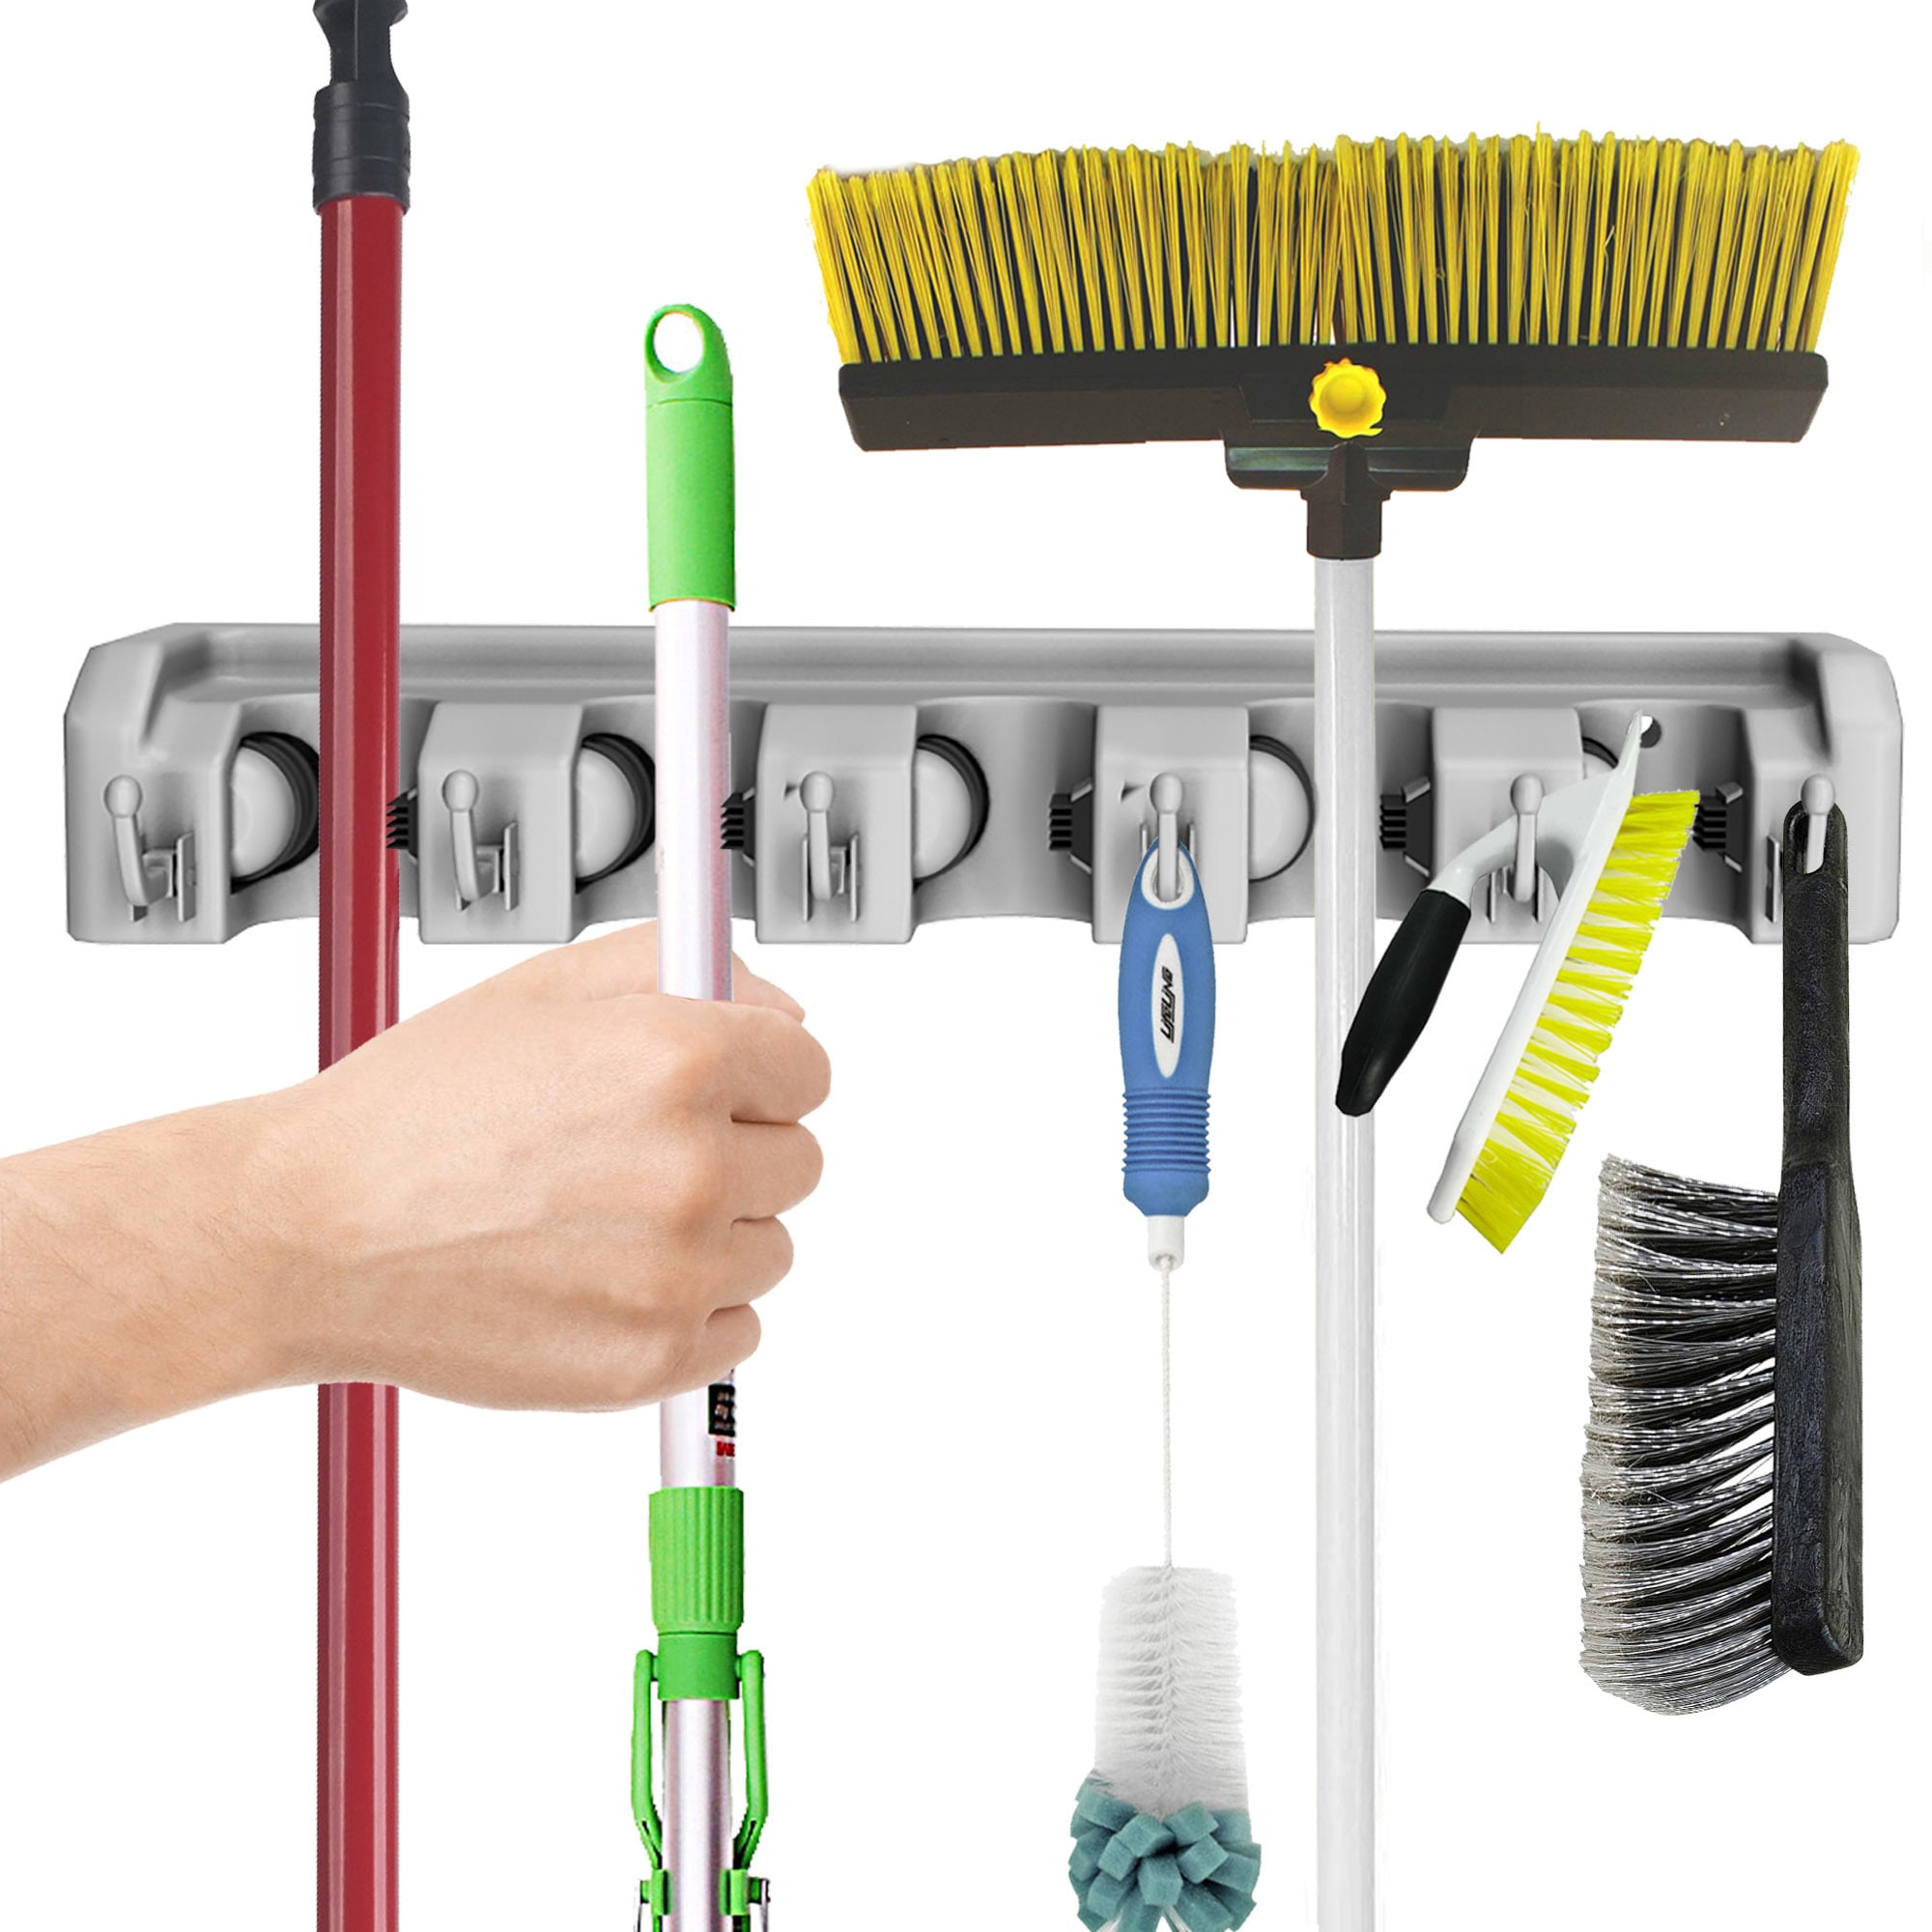 https://ak1.ostkcdn.com/images/products/20220852/Shovel-Rake-and-Tool-Holder-with-Hooks-Wall-Mounted-Organizer-for-Space-Saving-Rack-by-Stalwart-13f3557f-a700-44a2-b88a-f72adb7a3139.jpg